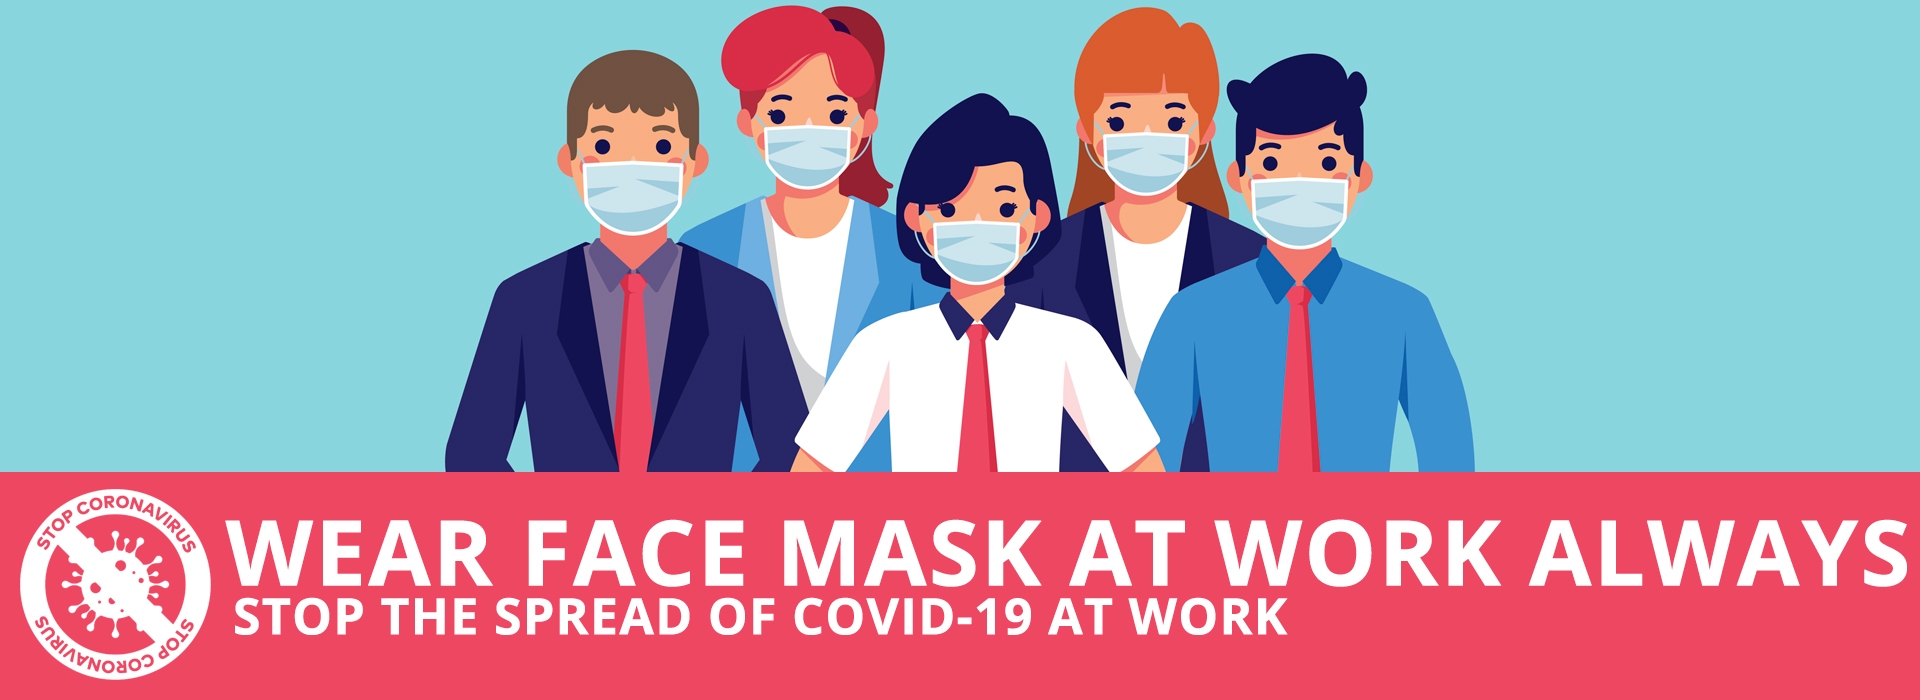 WEAR FACE MASK AT WORK